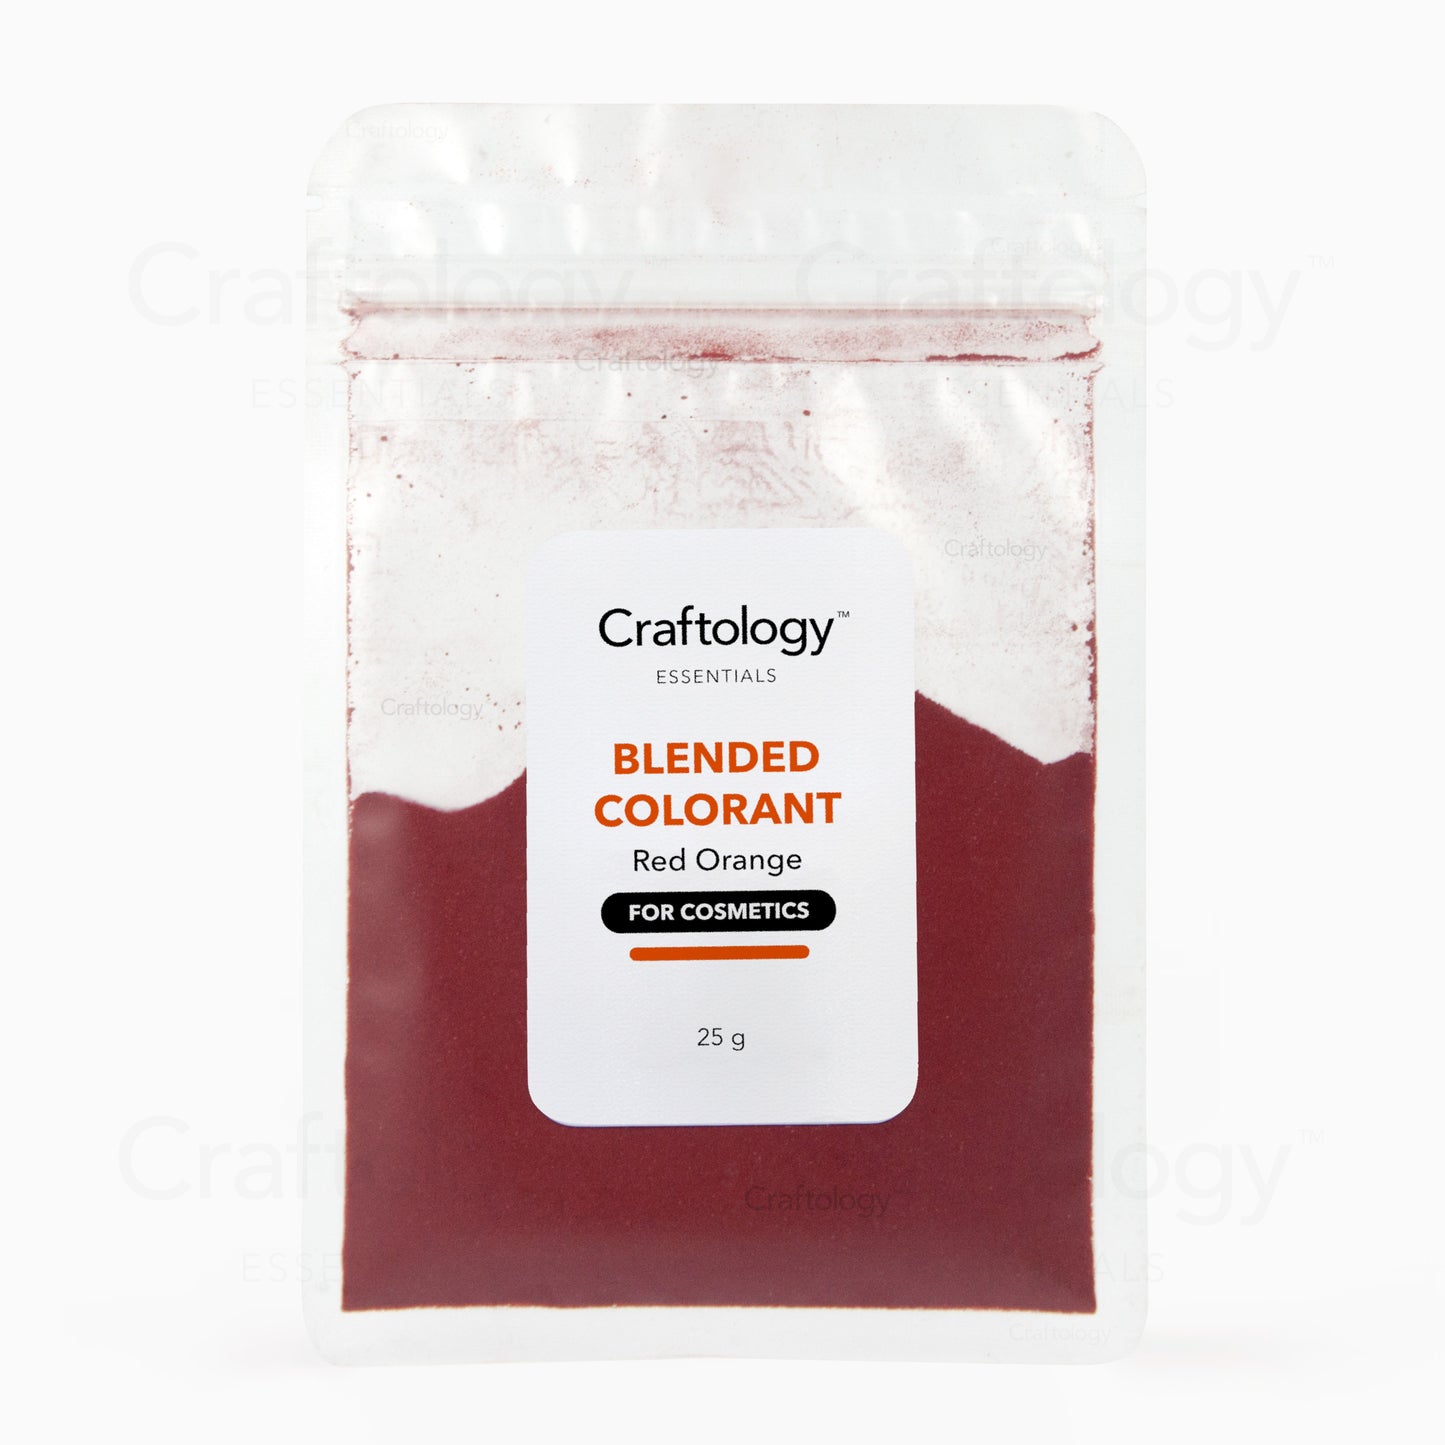 Blended Colorant - Red Orange - Craftology Essentials - Philippines